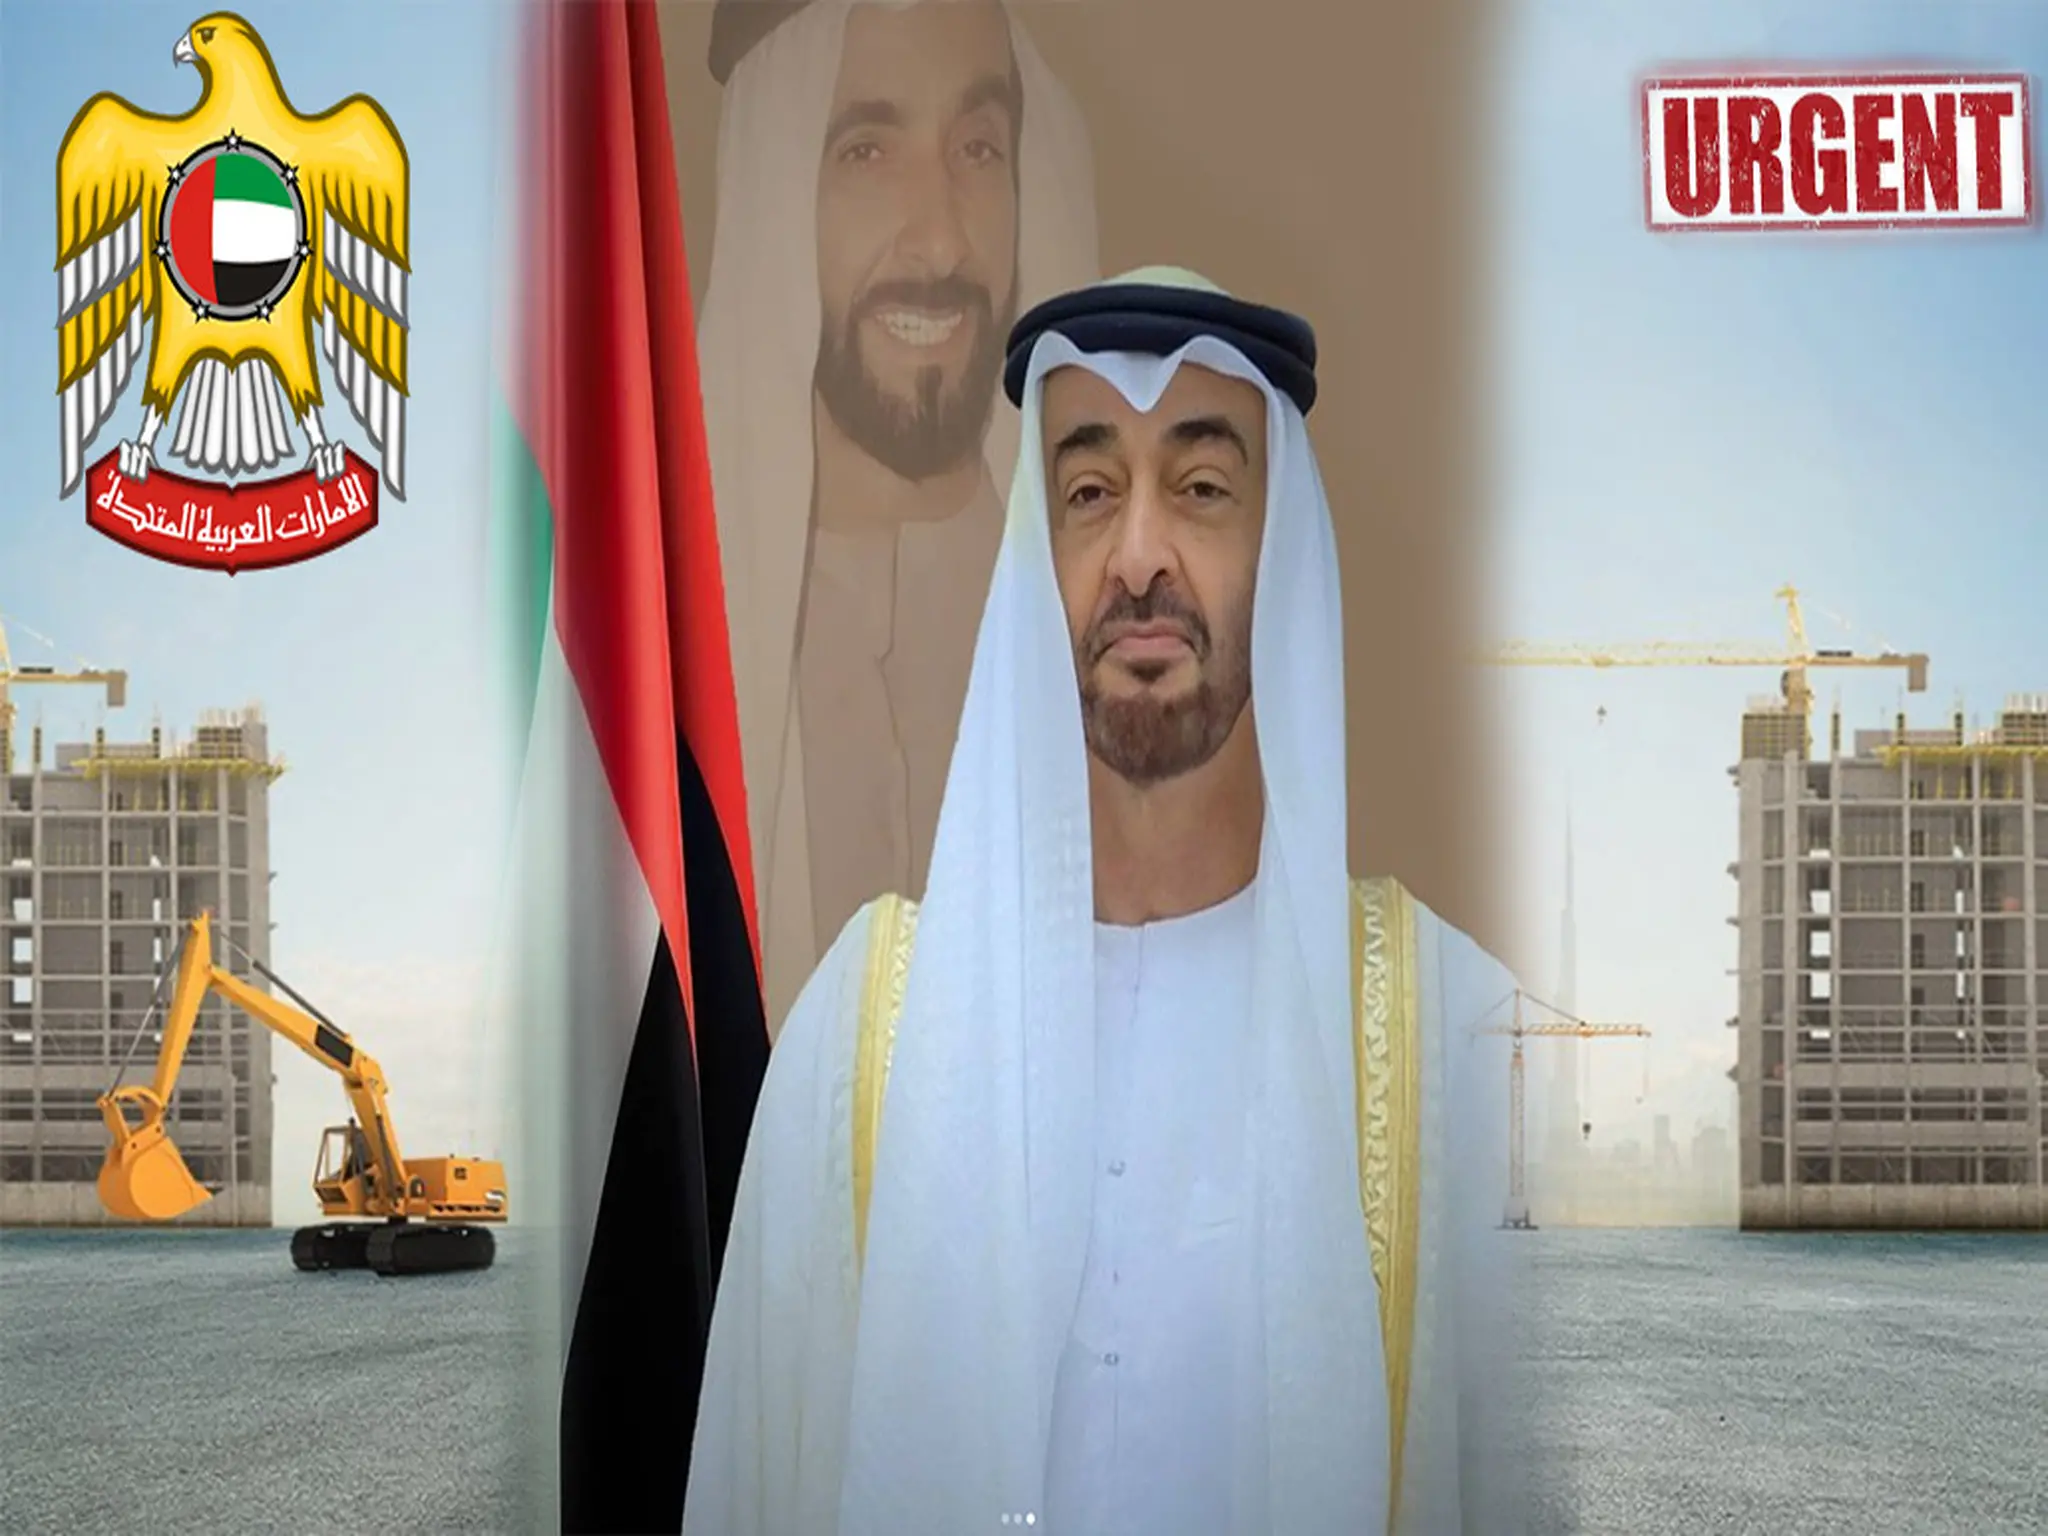 Urgent.. Providing 222.6 thousand job opportunities in the UAE within 3 months